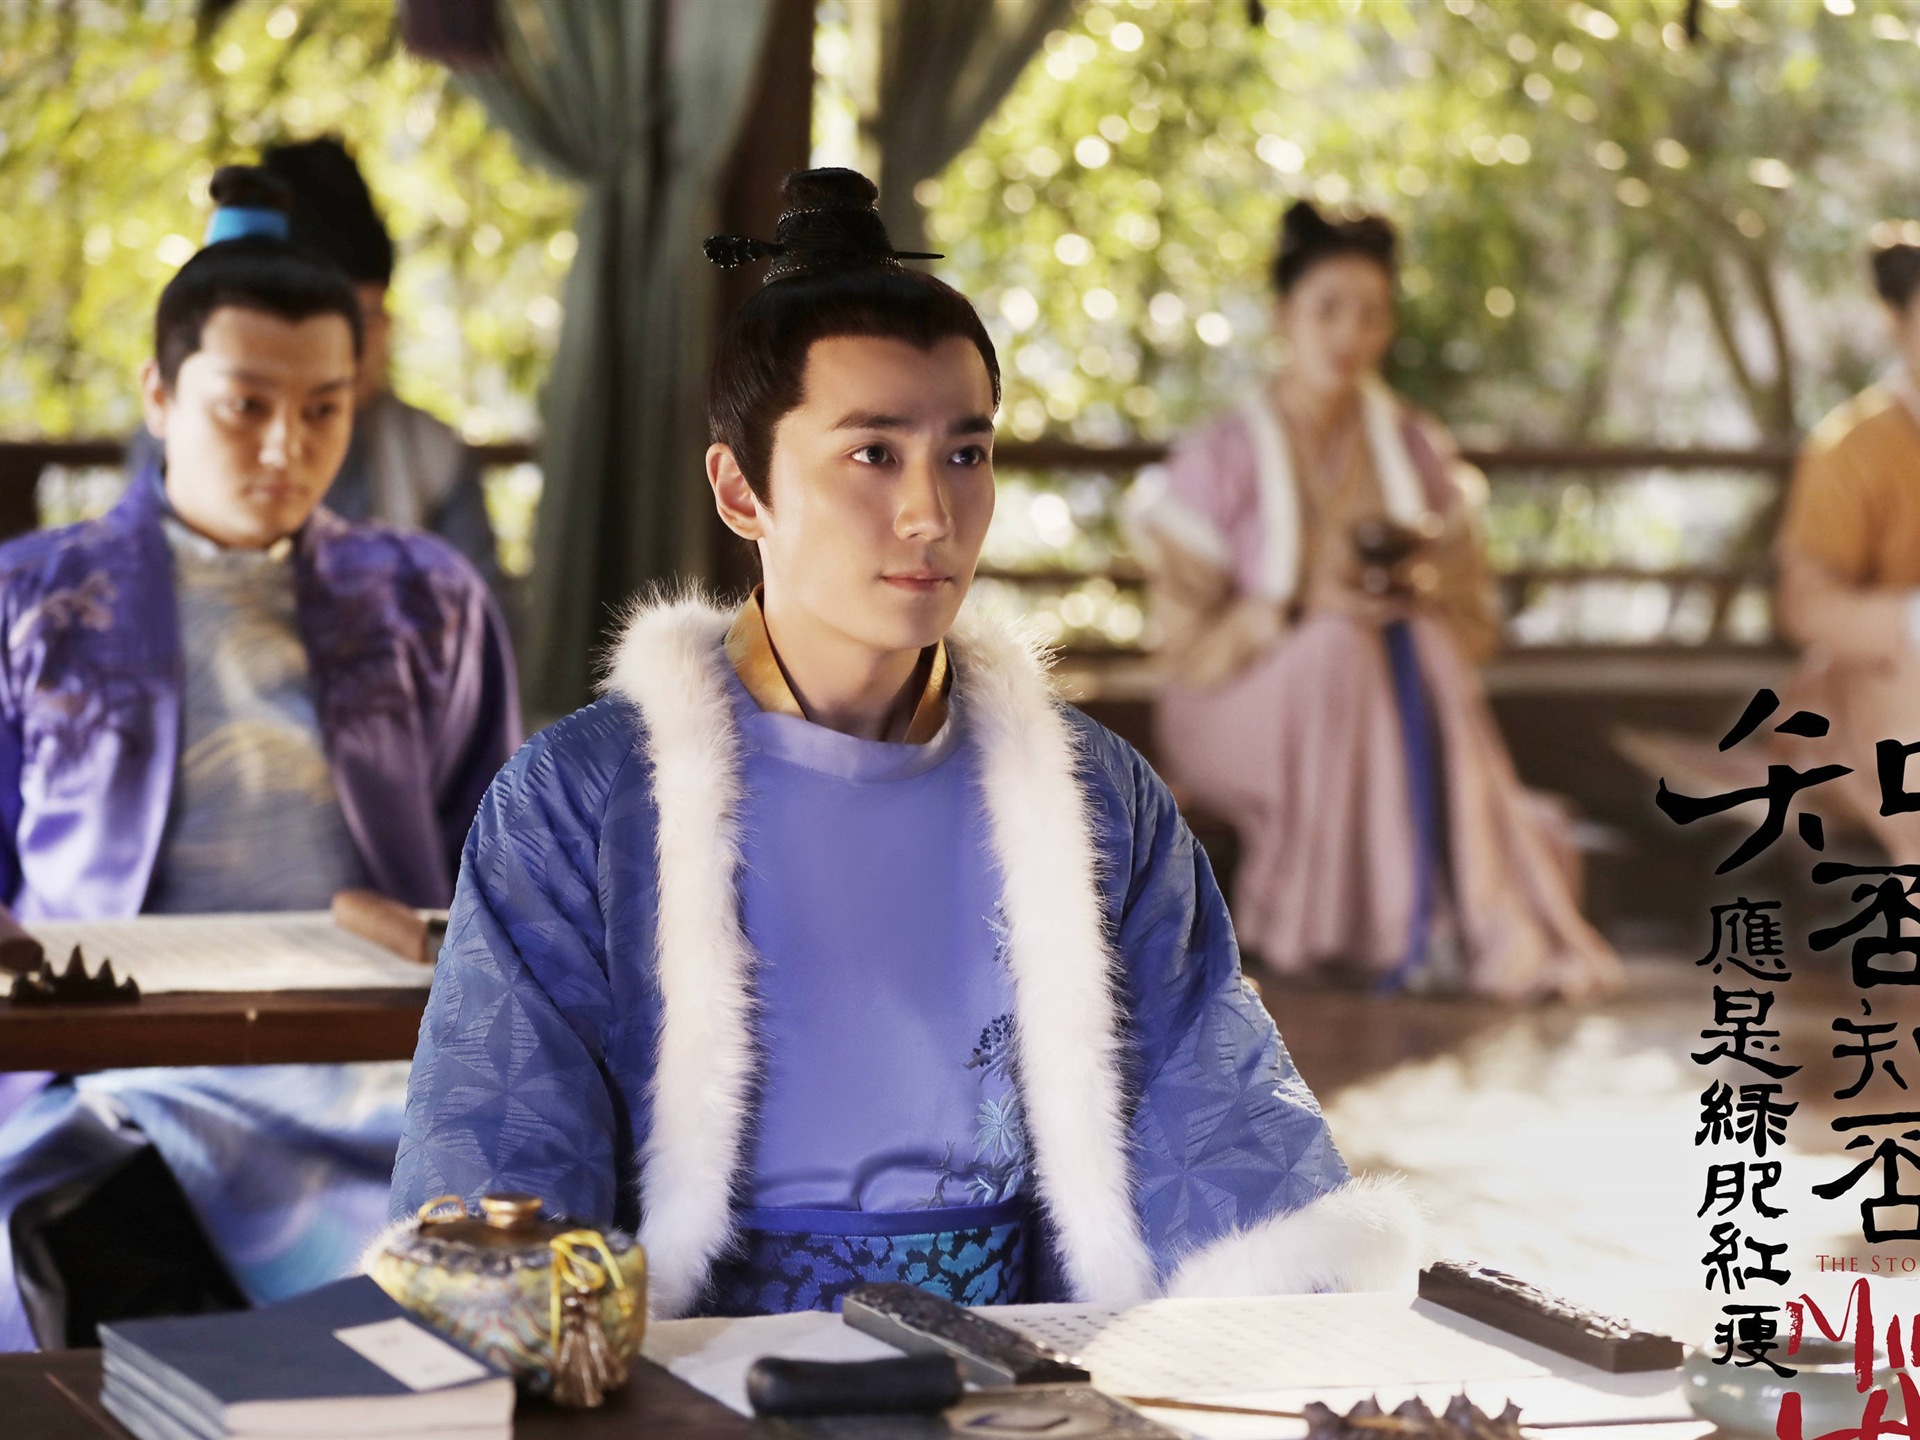 The Story Of MingLan, TV series HD wallpapers #52 - 1920x1440